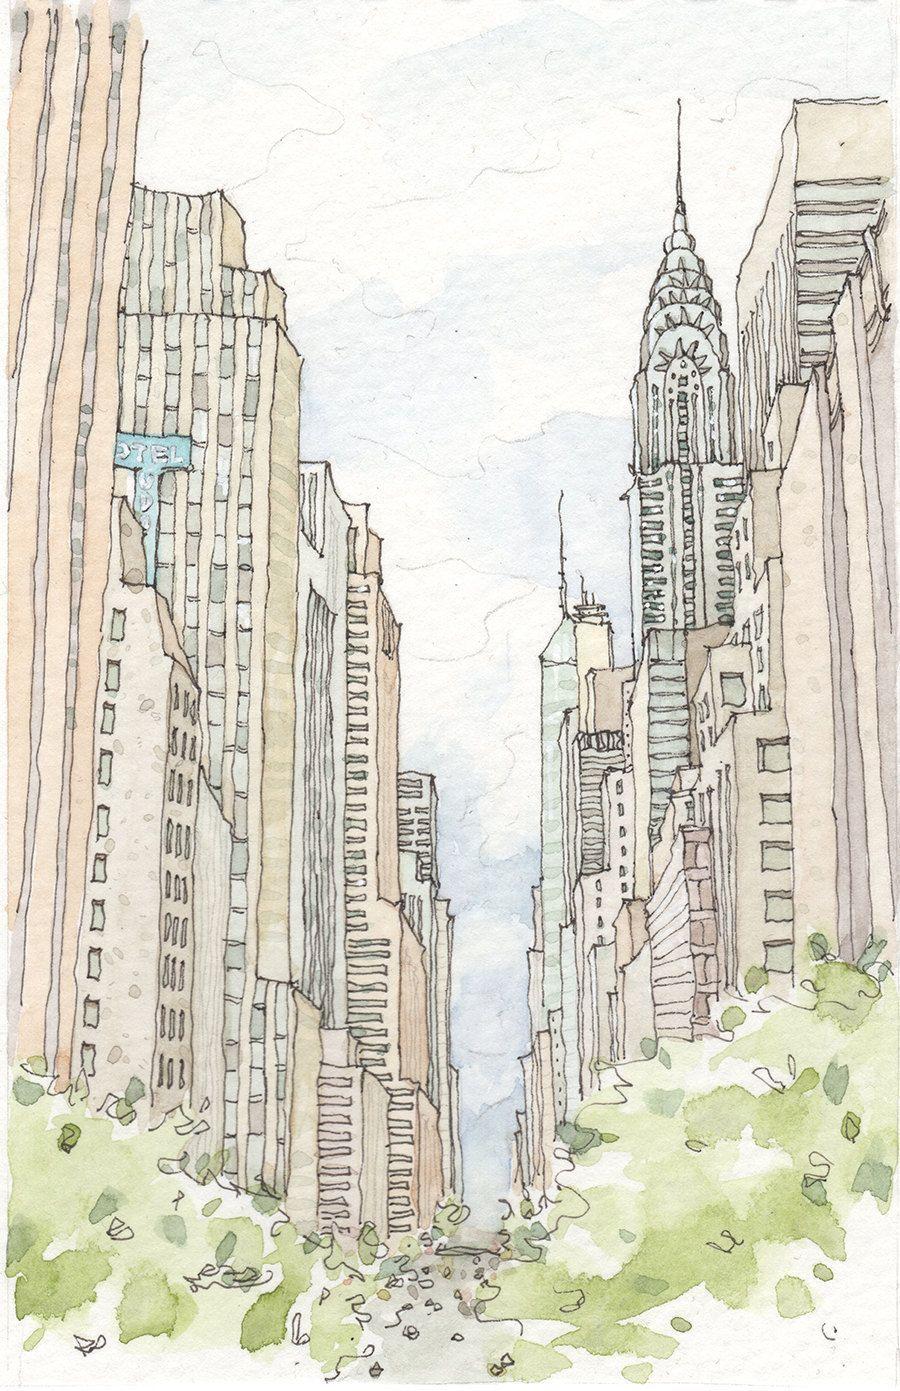 New York City Drawing Wallpapers Top Free New York City Drawing